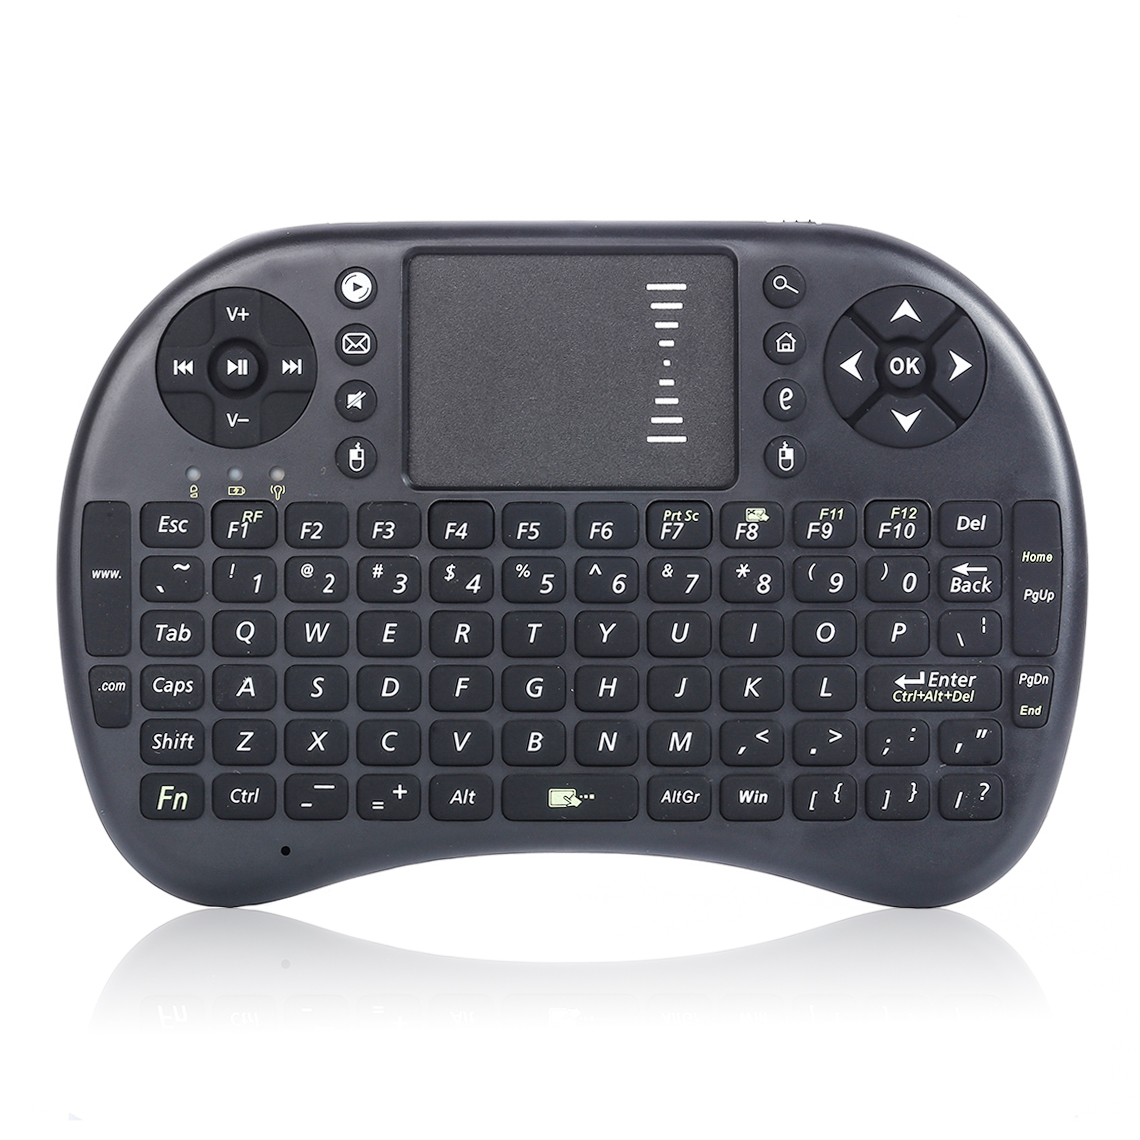 Original i8 Mini Wireless Keyboard 2.4G English Air Mouse QWERTY Keyboard Gaming USB Keyboard Touchpad For Android TV Box Laptop